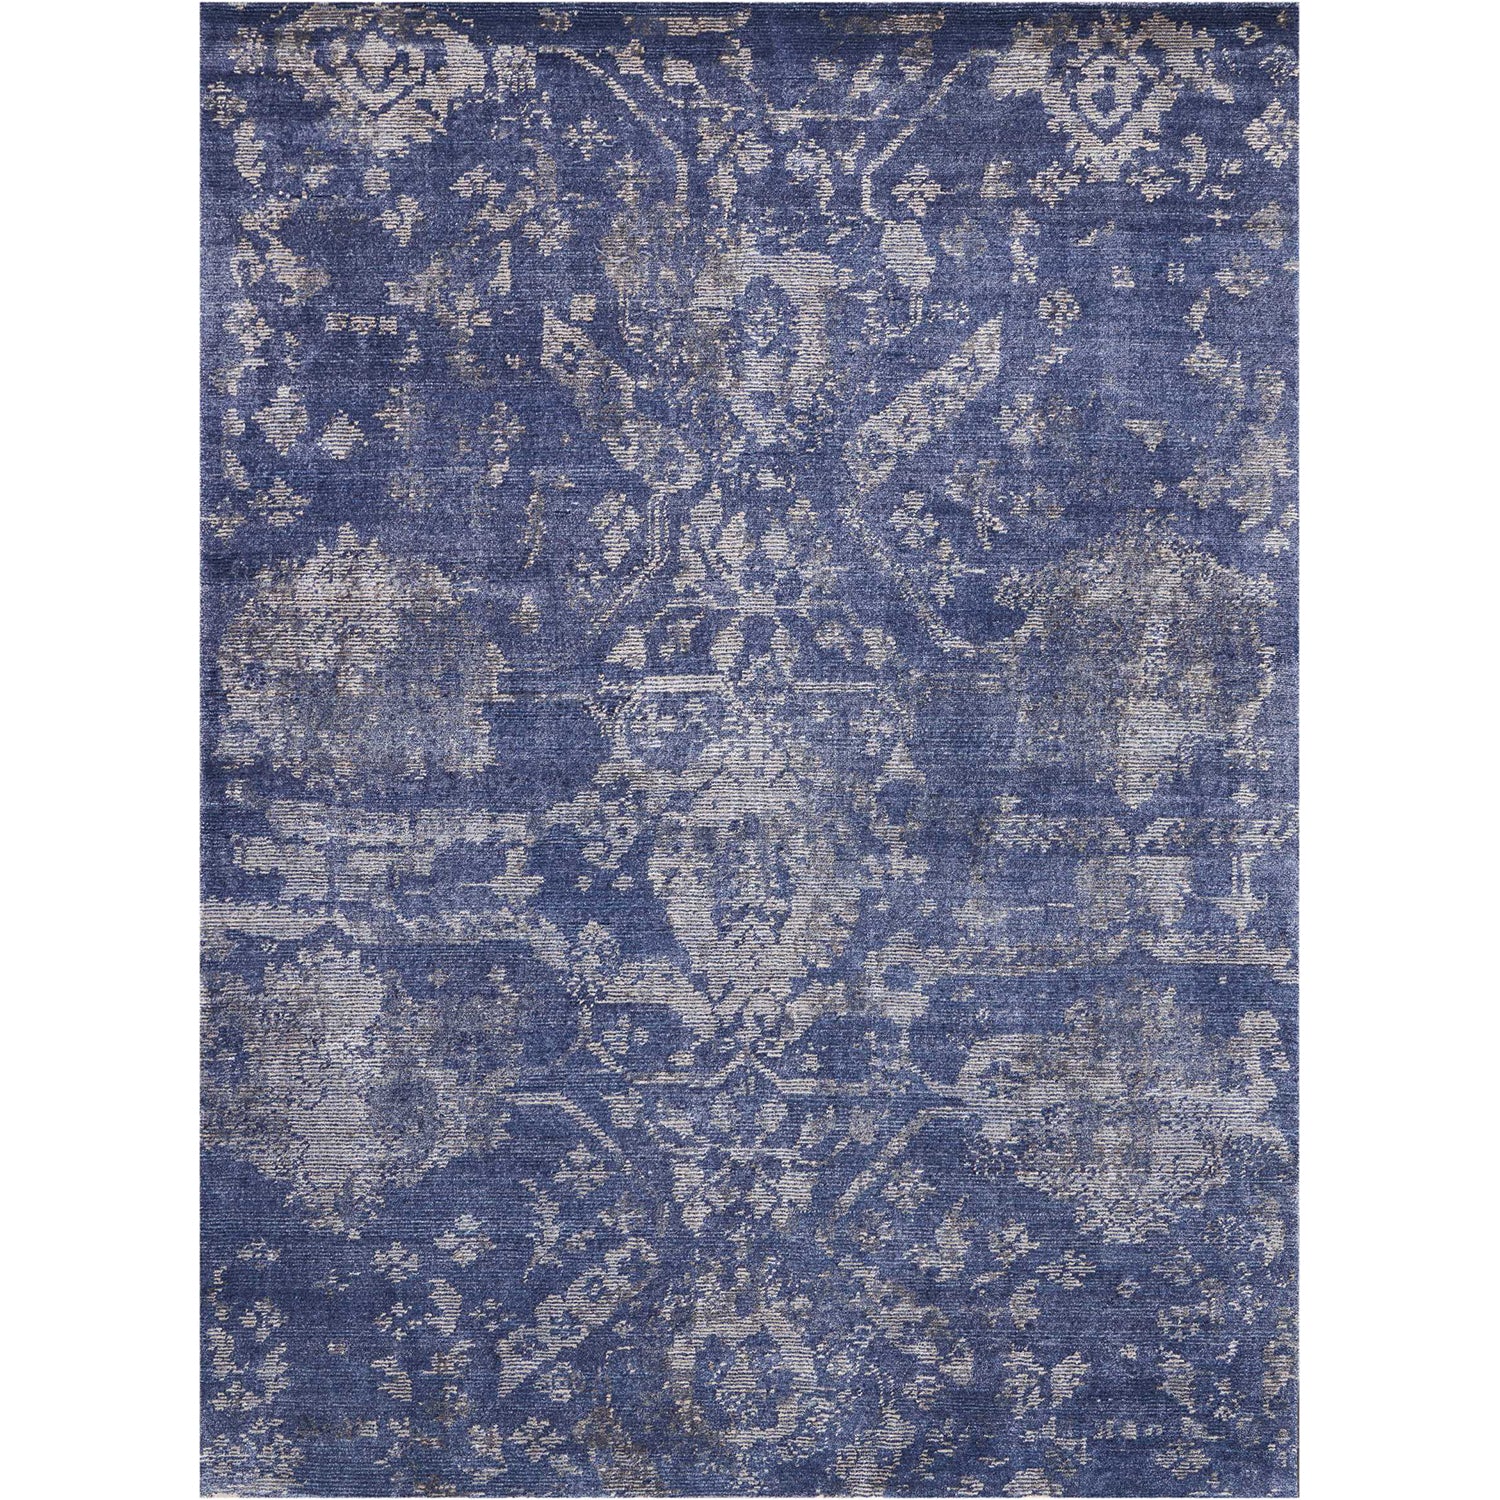 Intricately designed vintage rug with a Persian-inspired floral pattern.